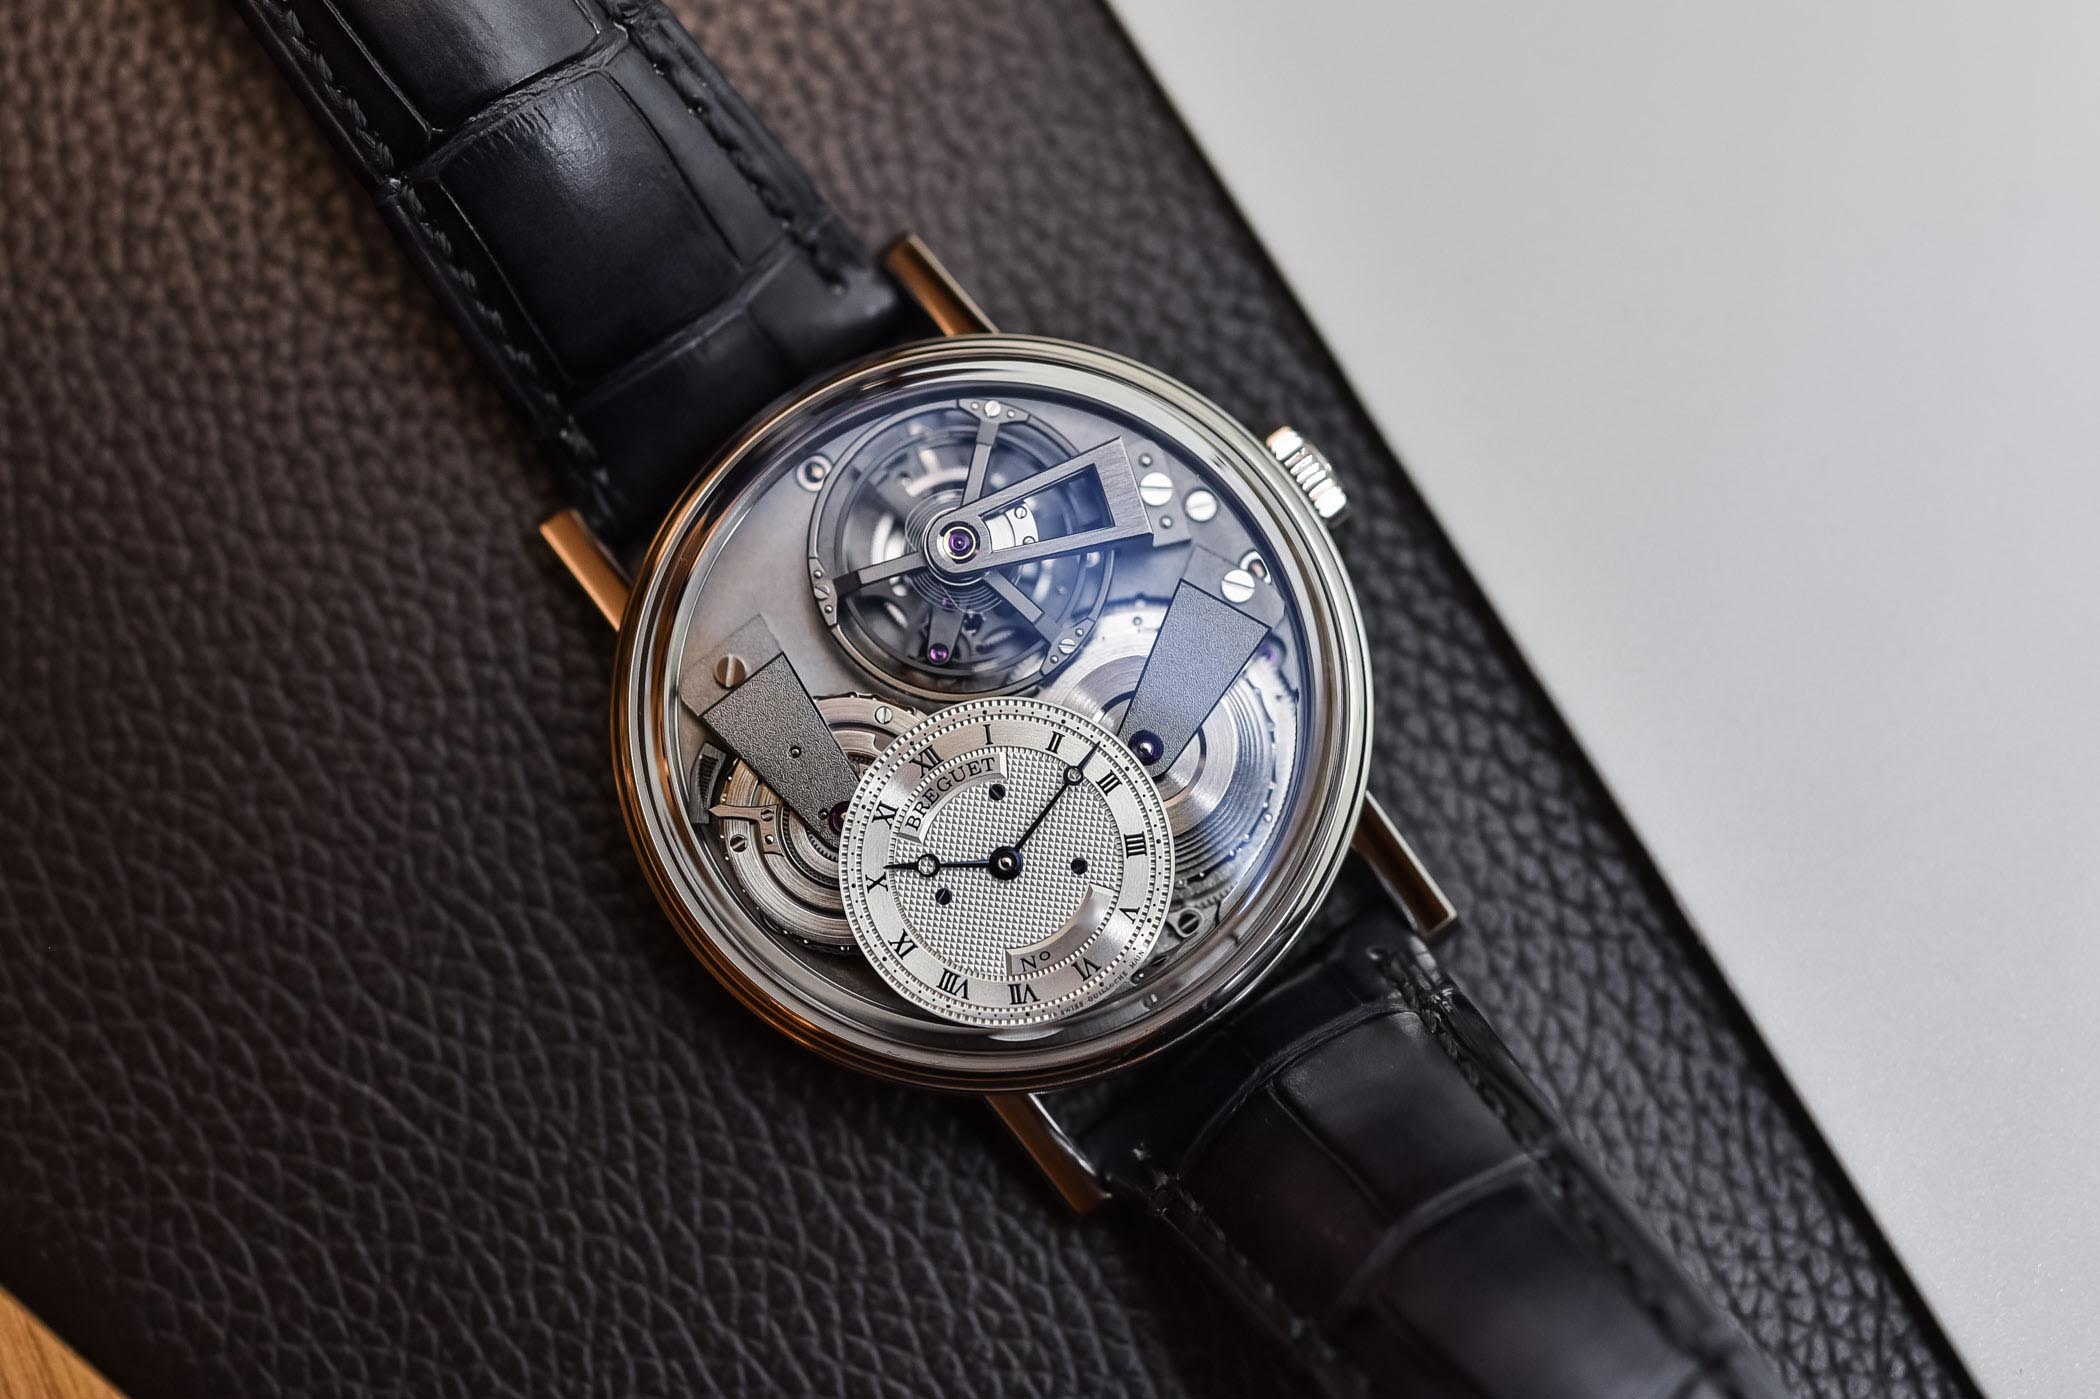 winewhiskywatches and his Breguet Tradition 7047 Fusee Tourbillon